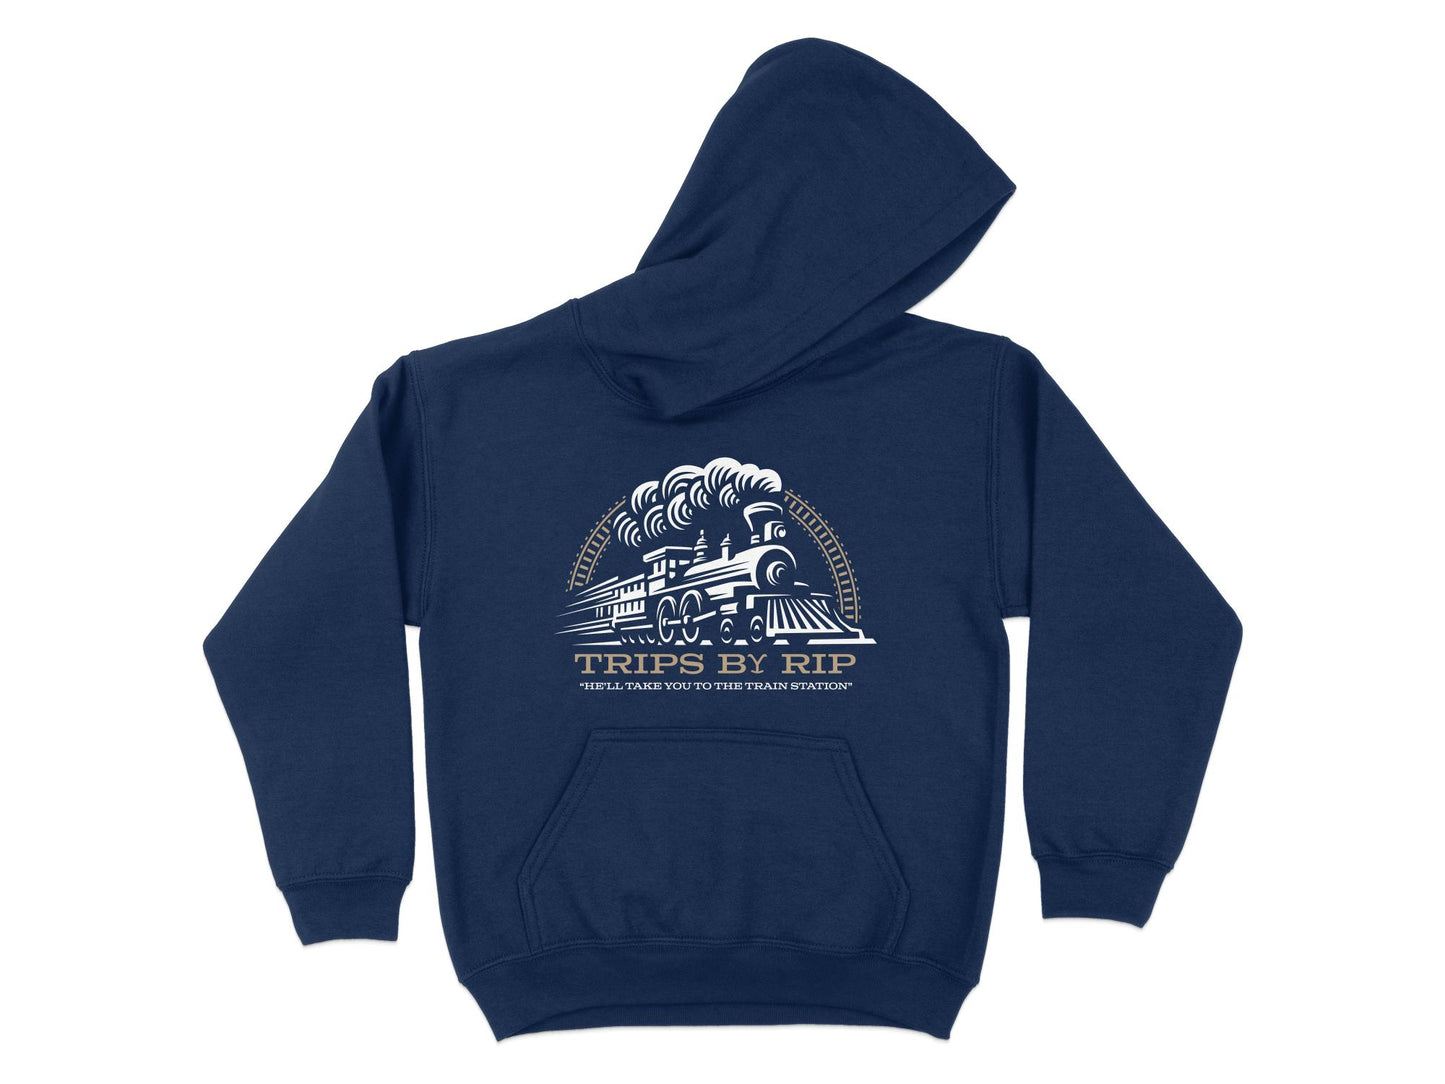 Yellowstone Hoodie - Trips By Rip, navy blue